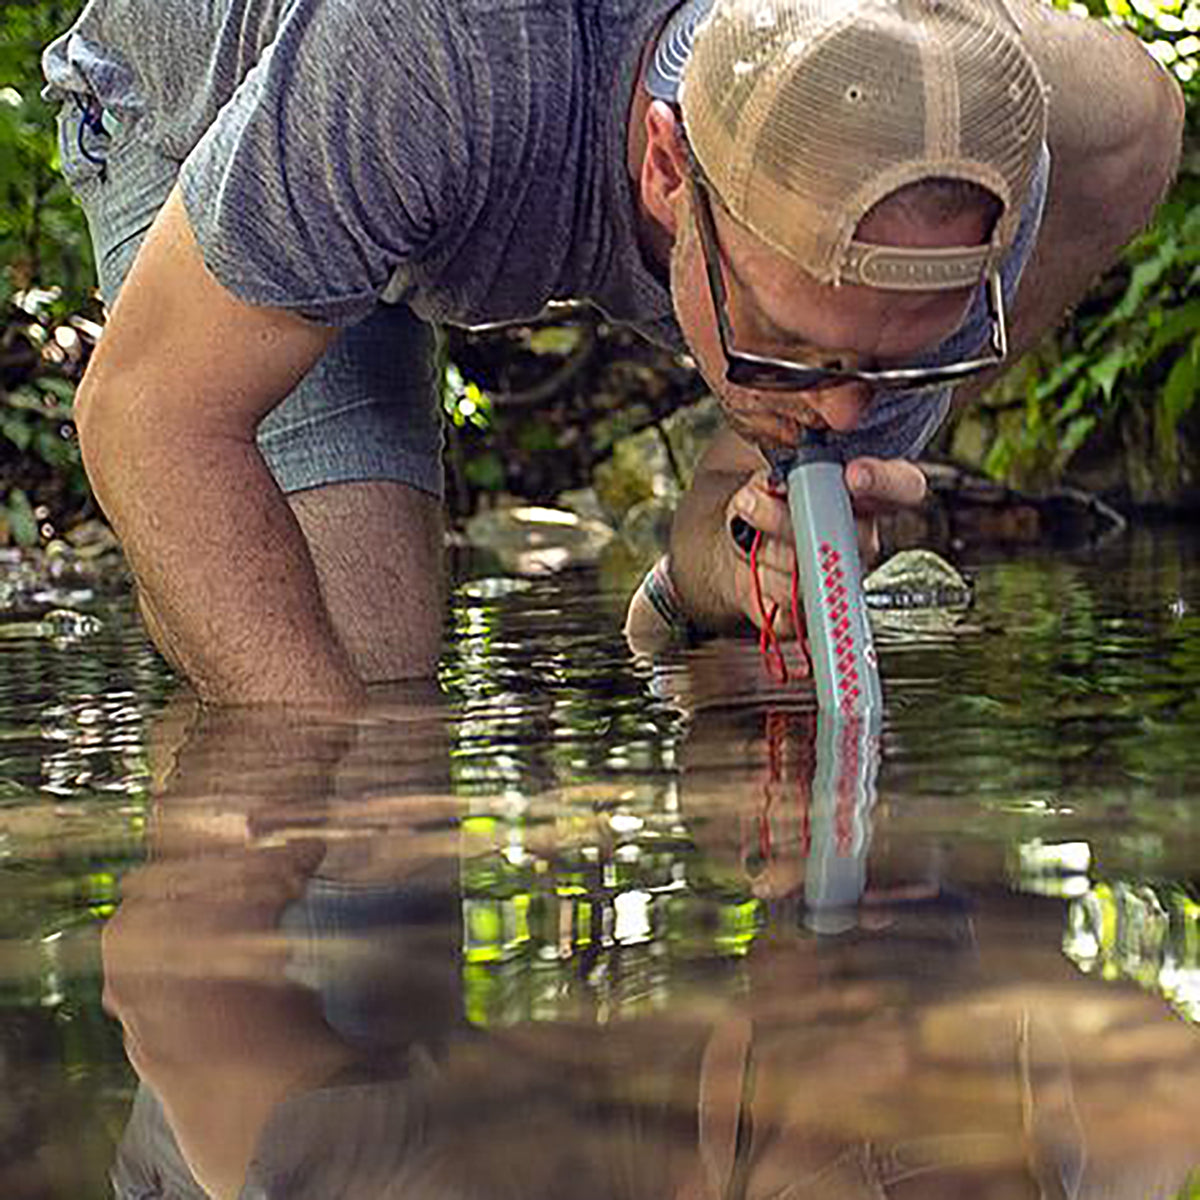 LifeStraw Personal Water Filter for Hiking, Camping, Travel, and Emergency Preparedness